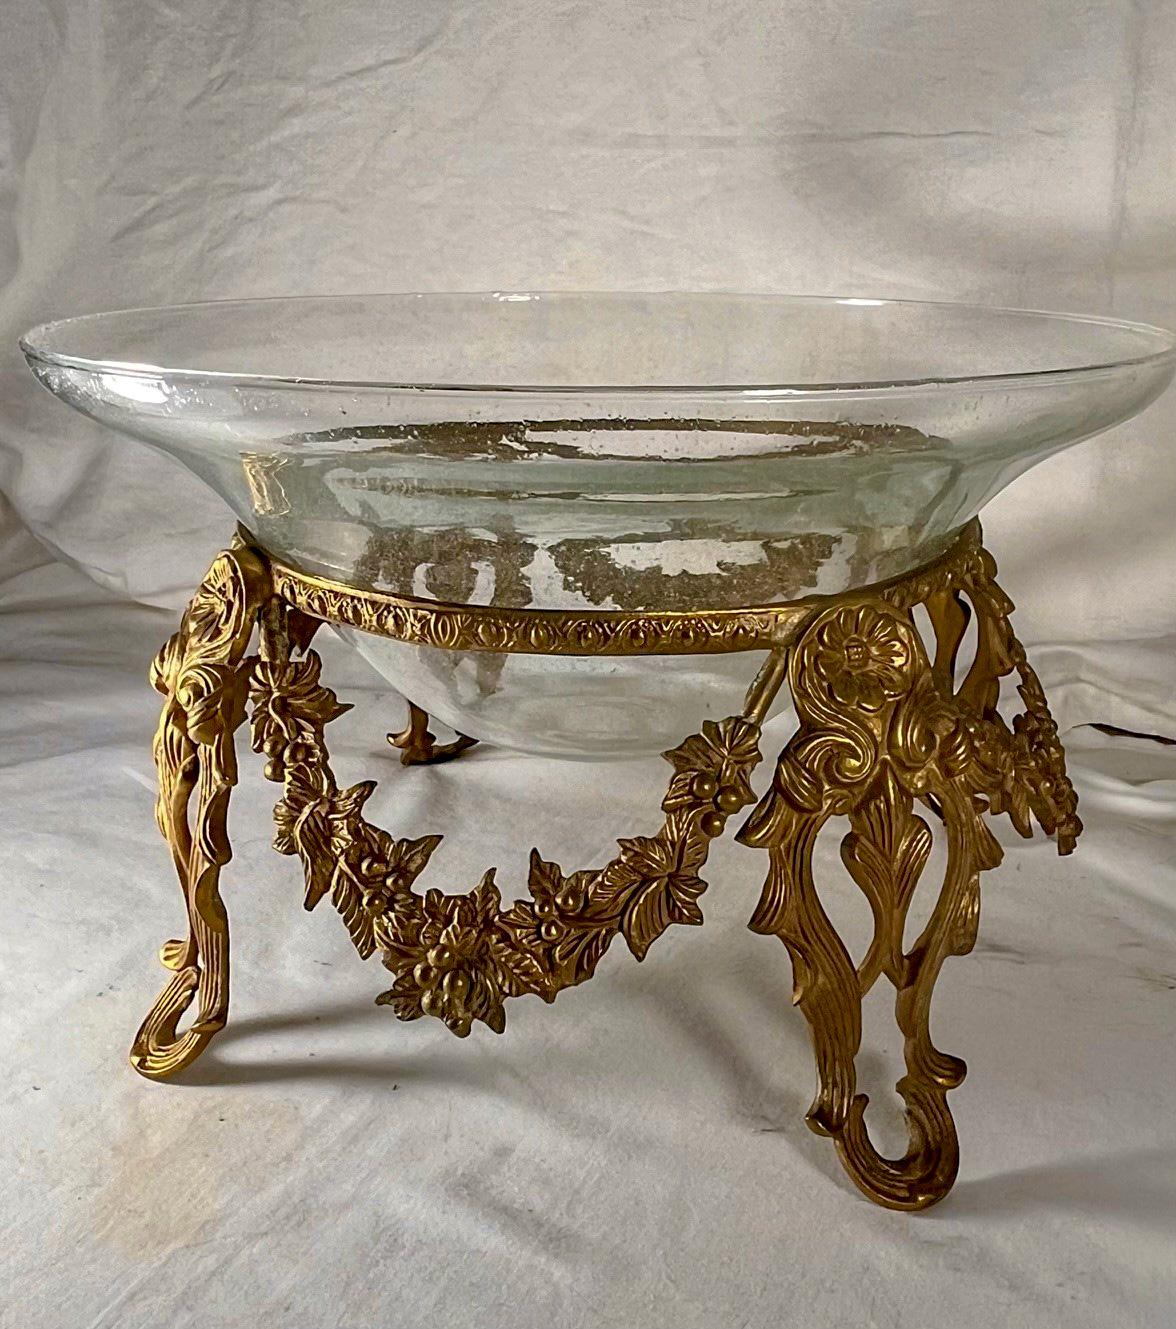 Moulage Vintage Large Art Glass Bowl Tazza Centerpiece Bowl in Brass Stand en vente